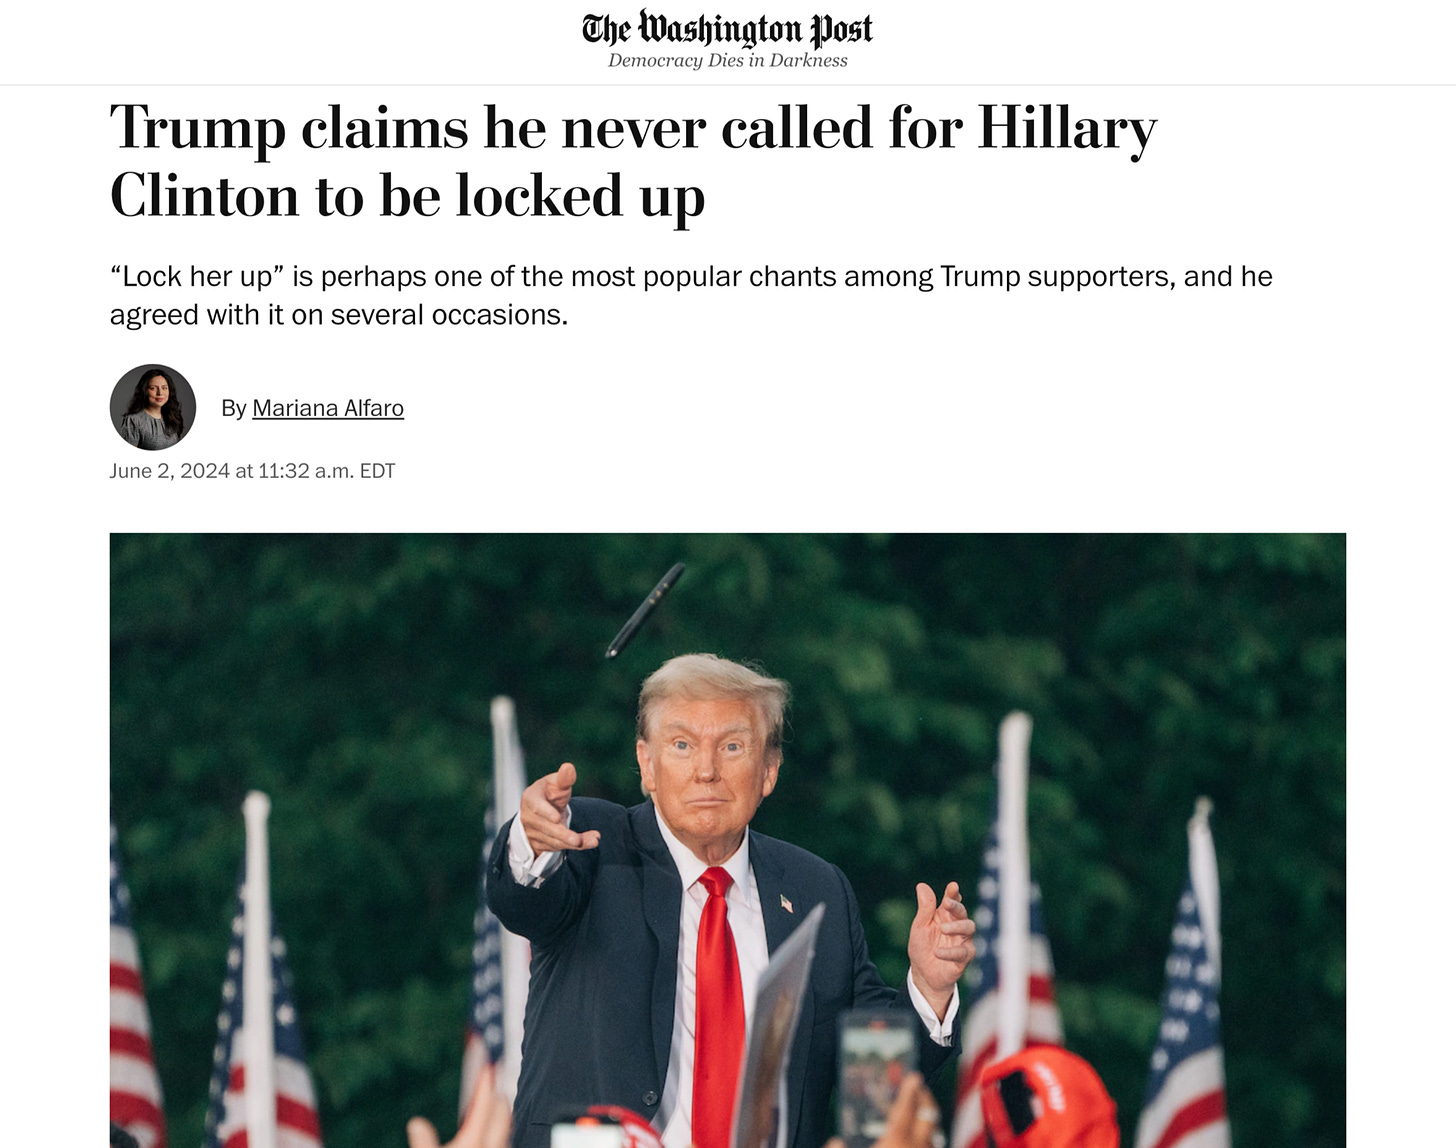 Trump claims he never called for Hillary Clinton to be locked up